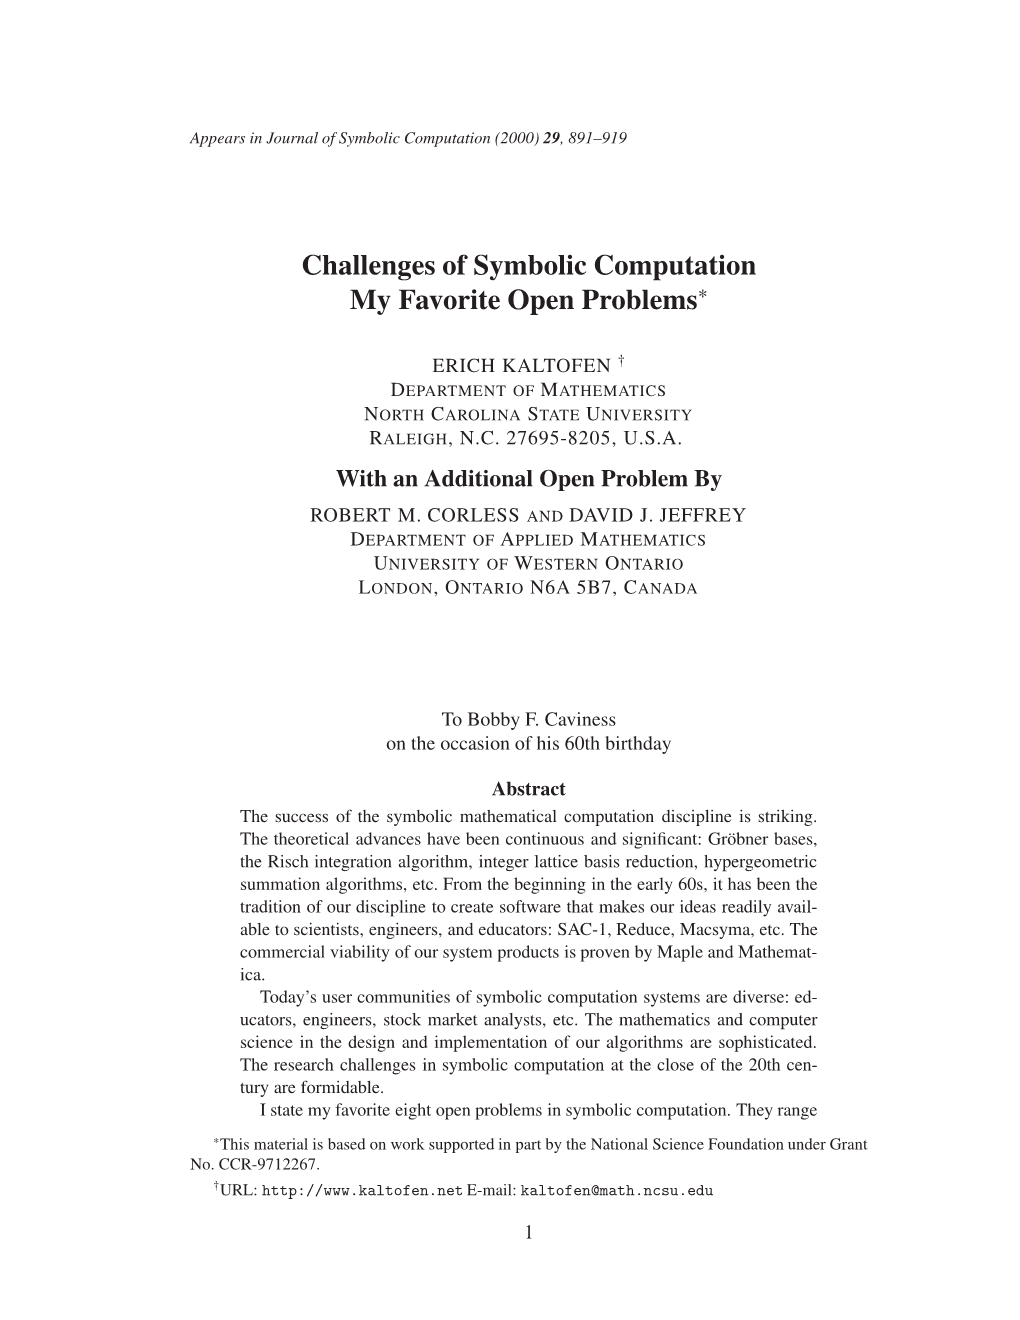 Challenges of Symbolic Computation My Favorite Open Problems*